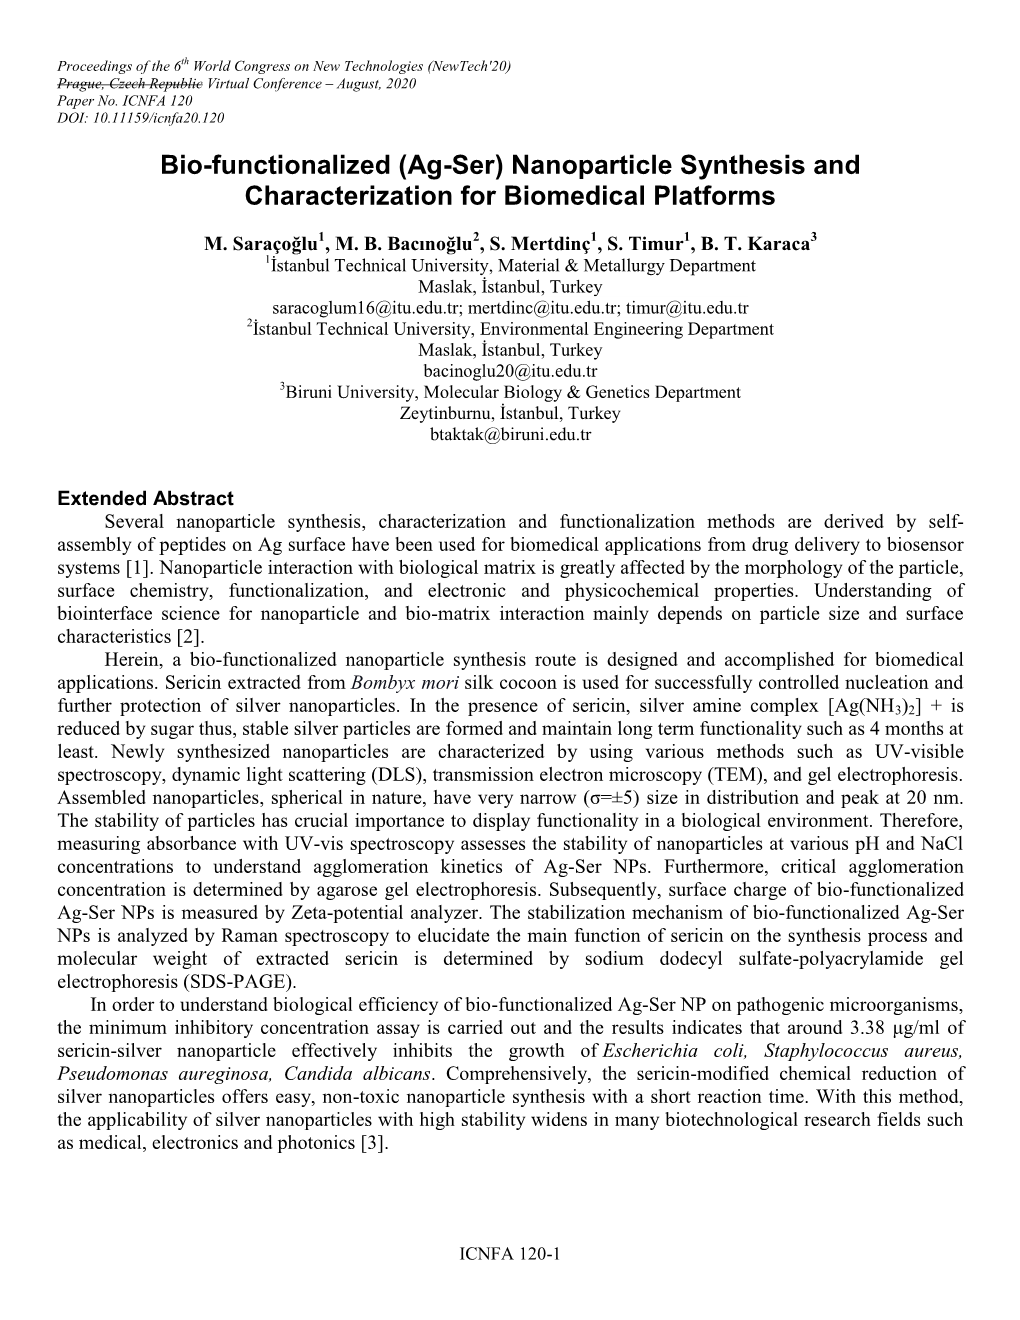 Nanoparticle Synthesis and Characterization for Biomedical Platforms